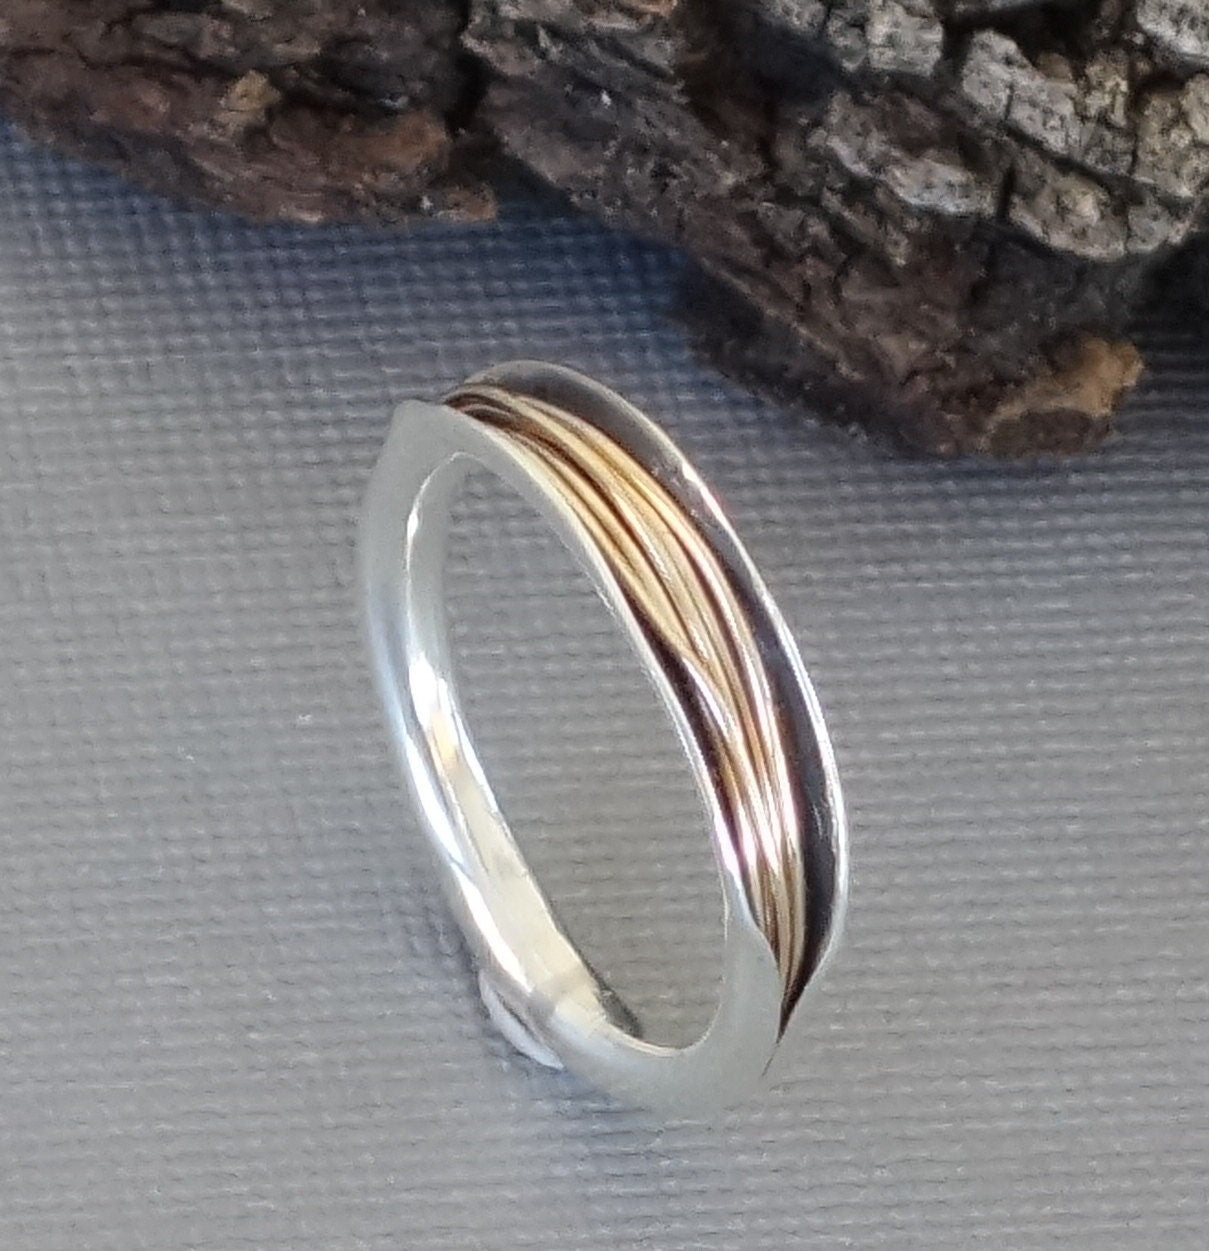 Anticlastic Ring, Black and Gold Band, Silver and Gold Ring, Made to Order